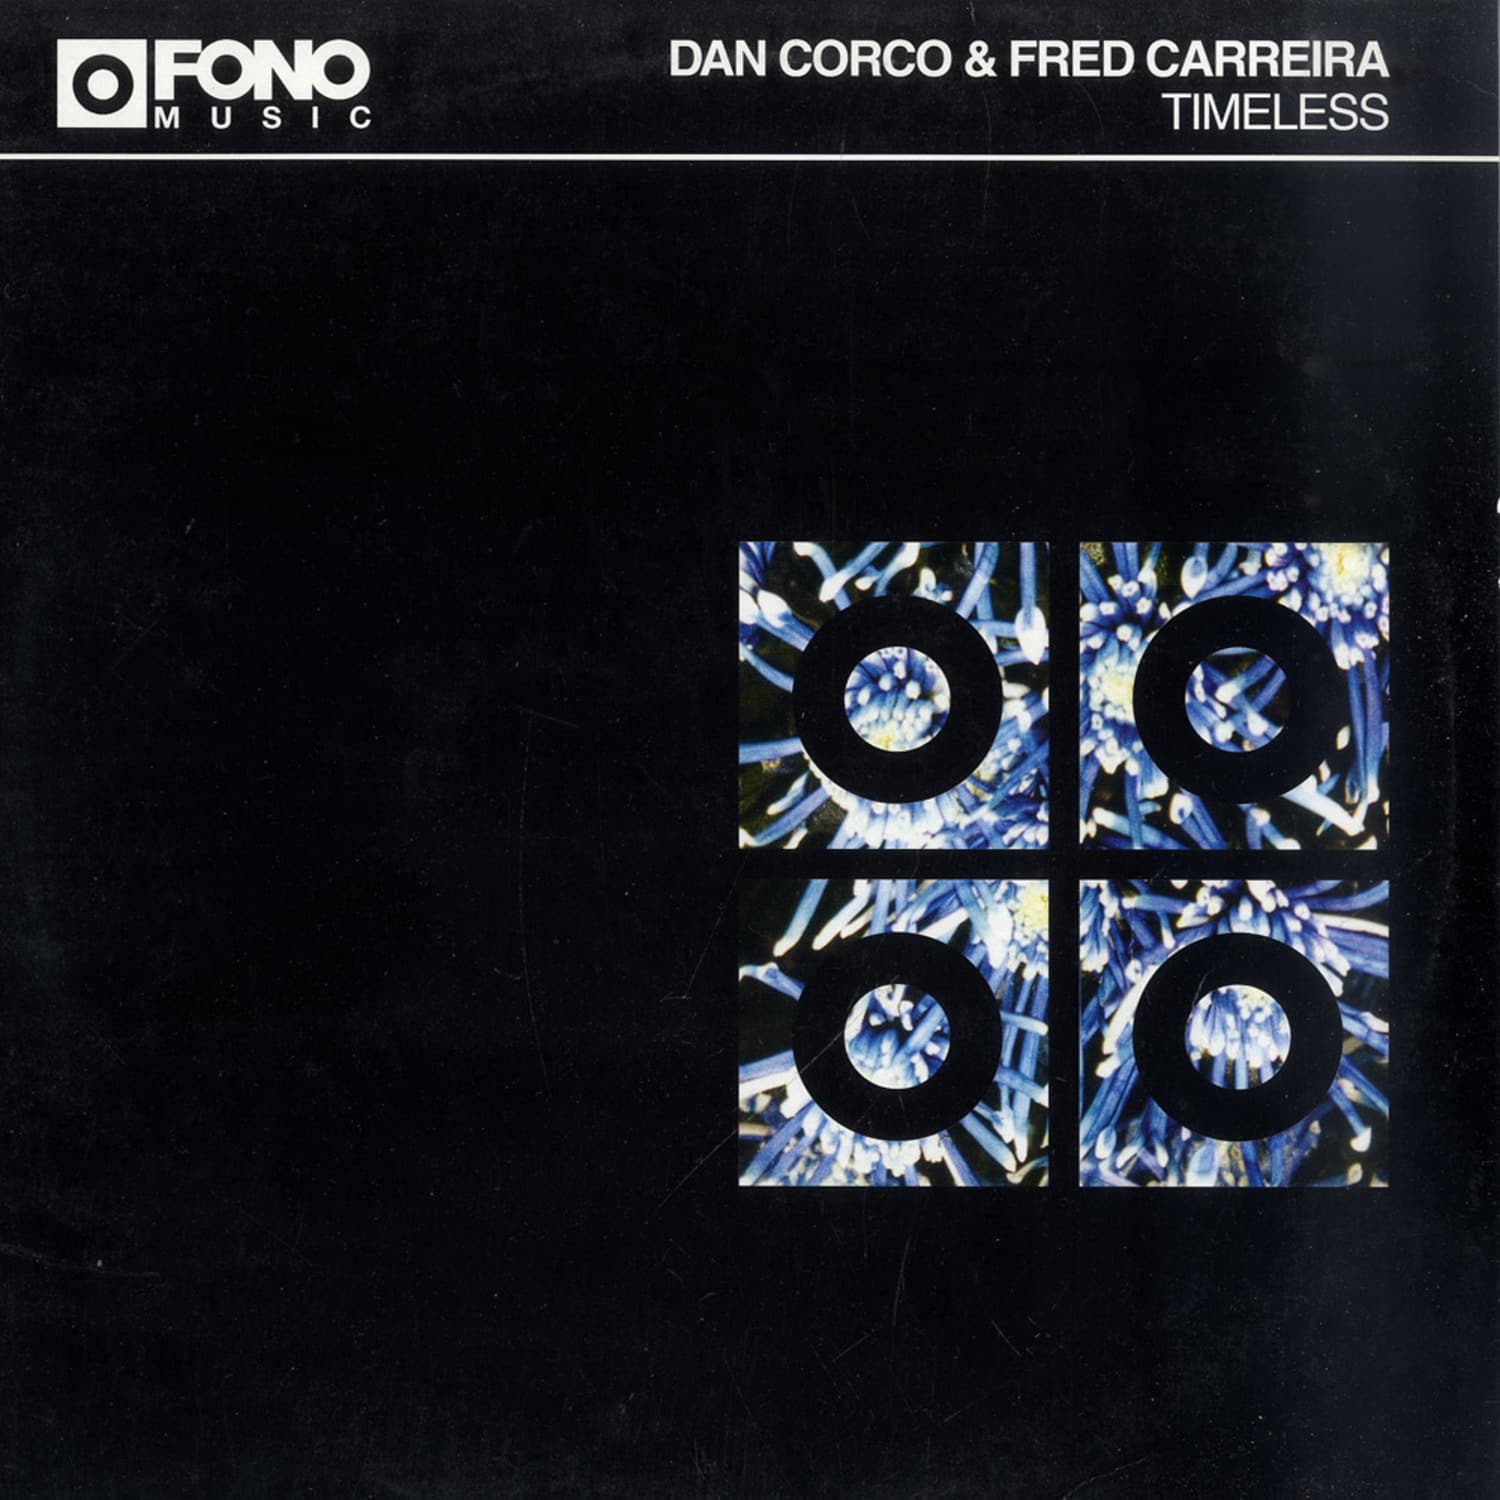 Dan Corco & Fred Carreira - TIMELESS